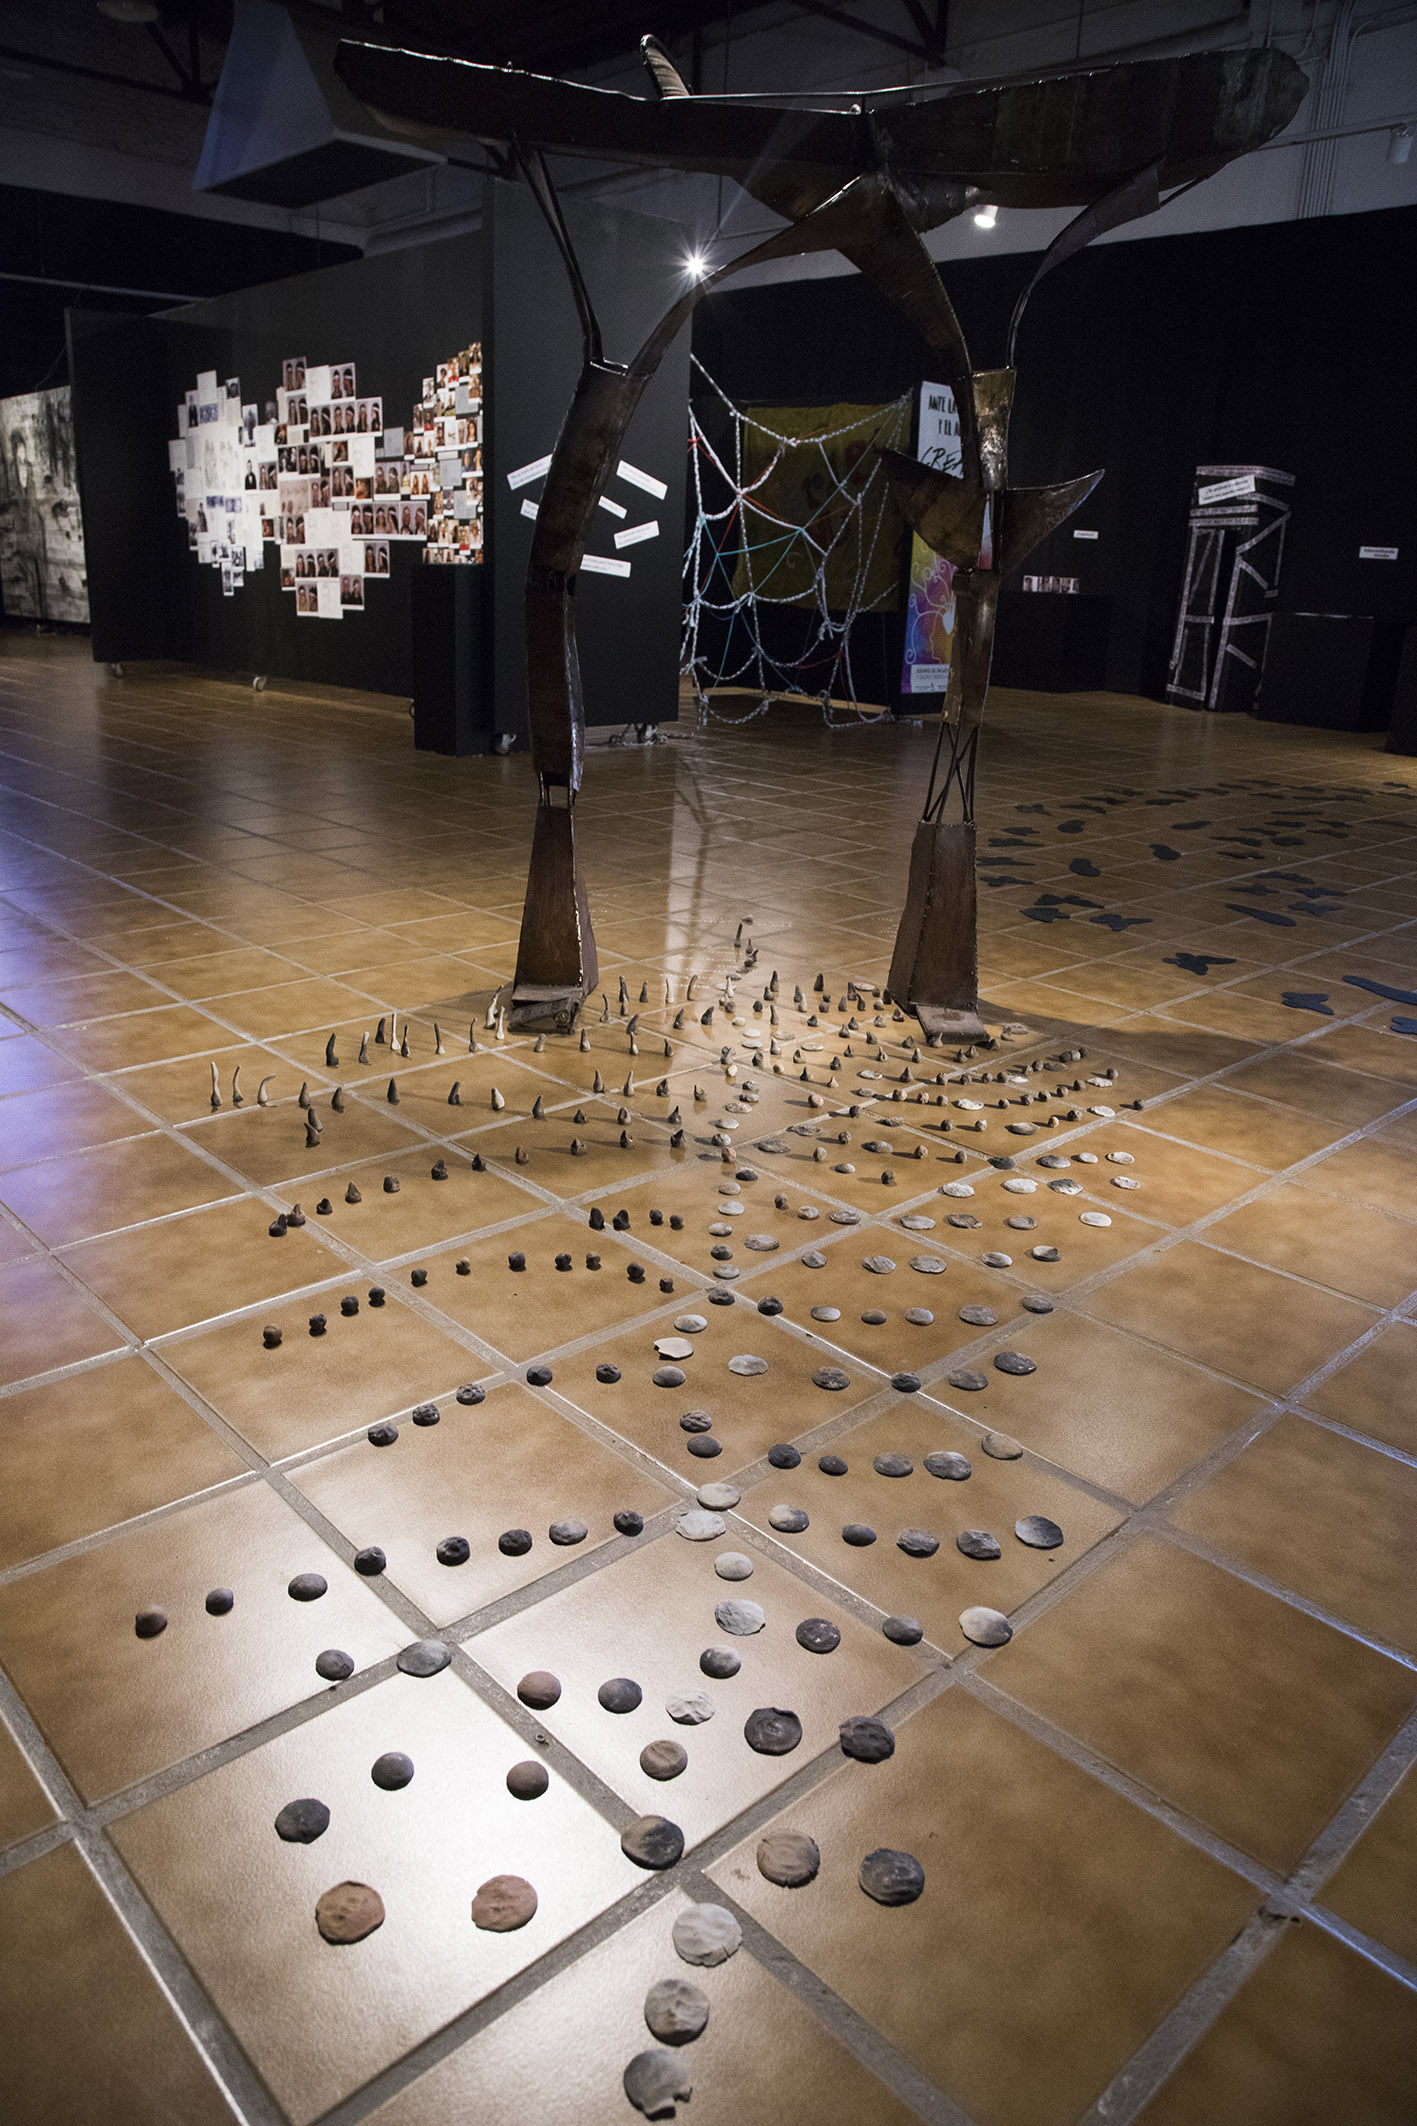 Art installation with large metal sculpture and tokens in pattern along the floor. With gallery and other art in the background.